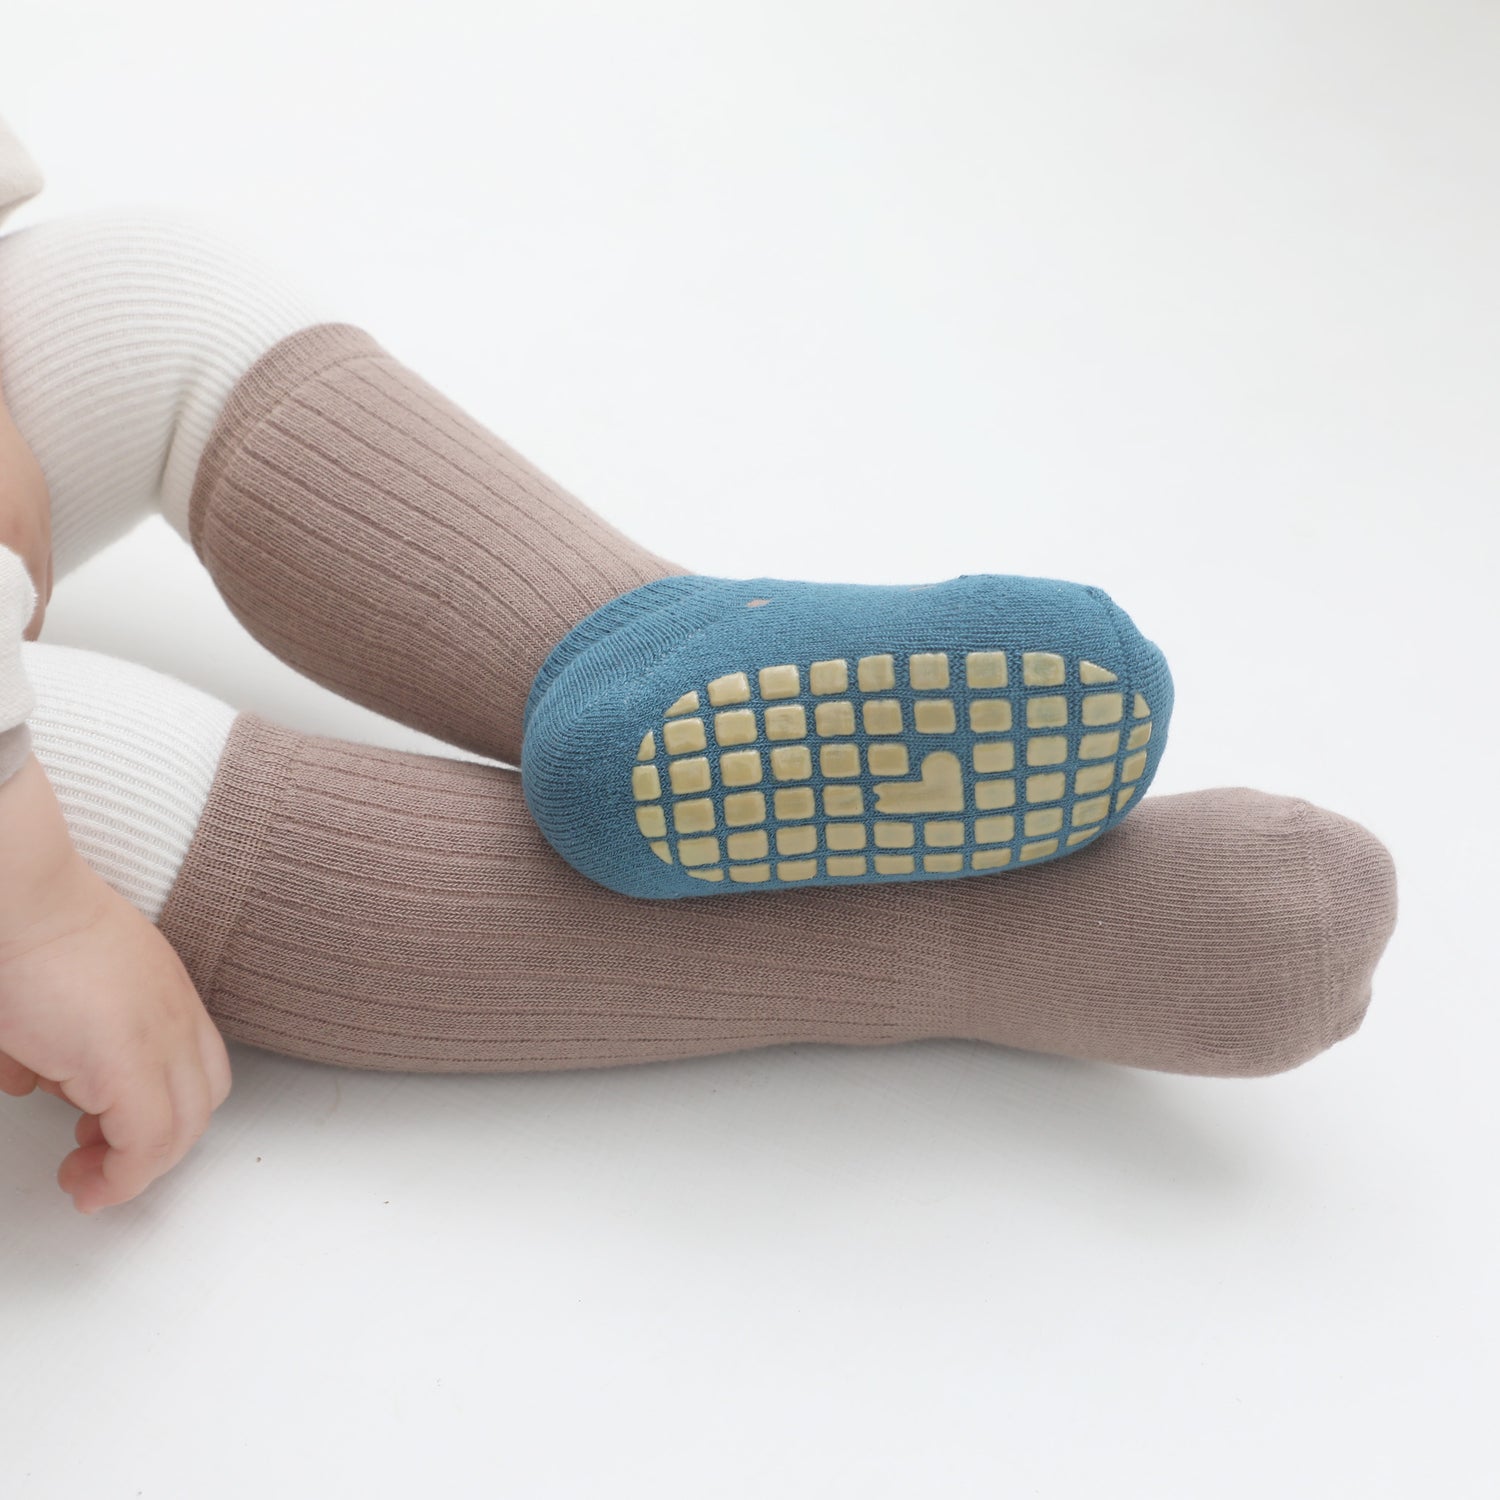 non-slip baby socks for everyday comfort and protection.